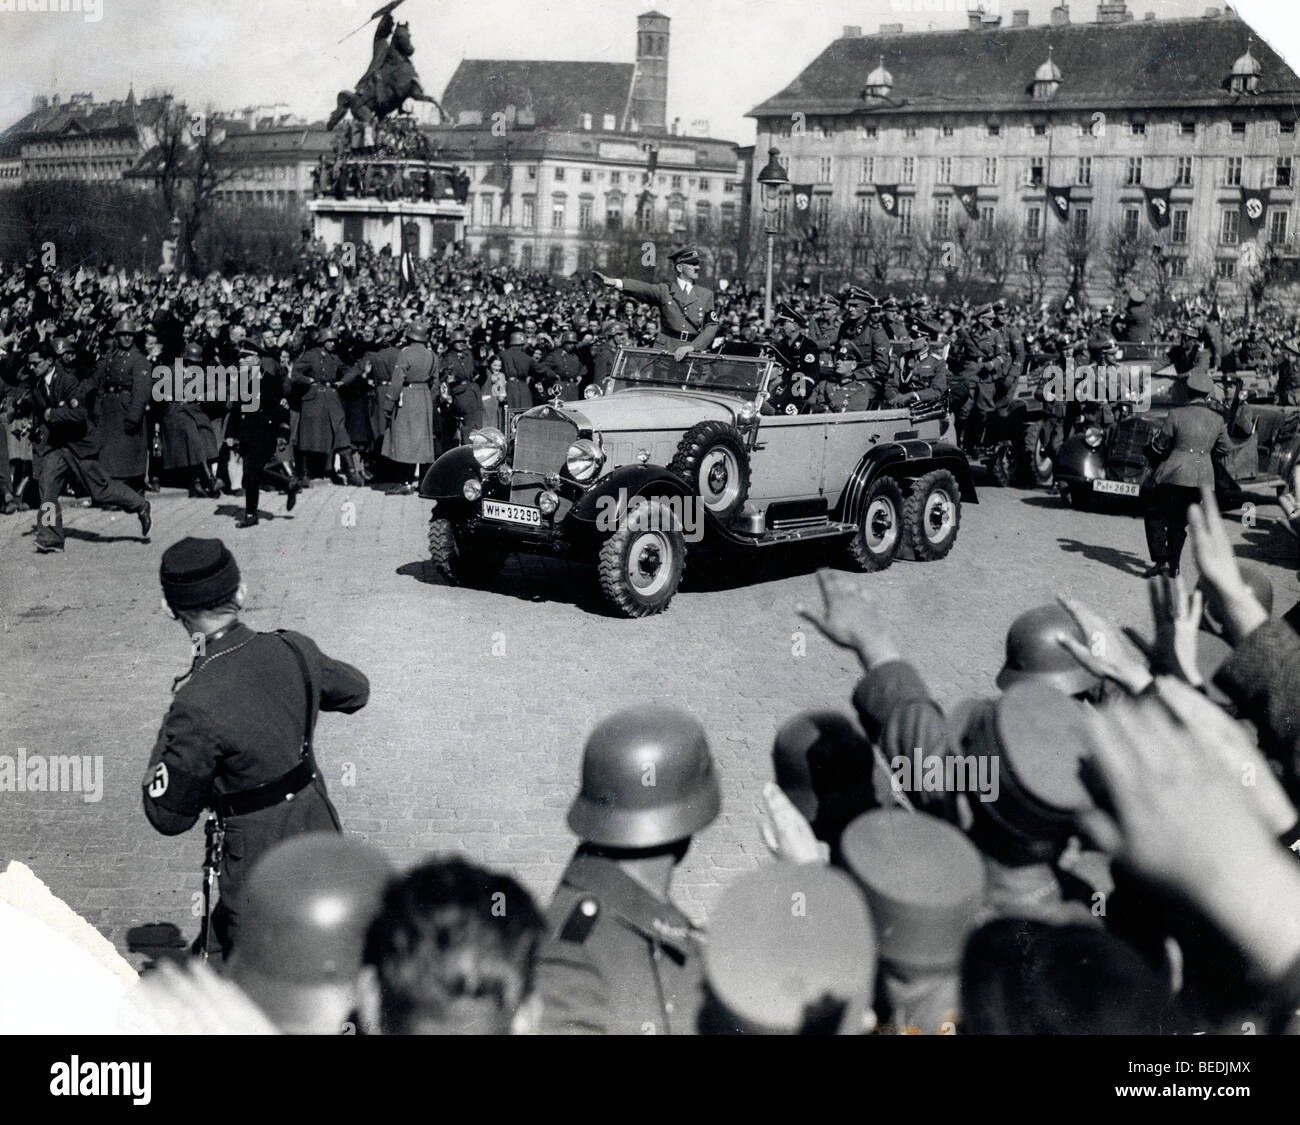 Adolf Hitler entering the square of the Old Imperial Palace Stock Photo